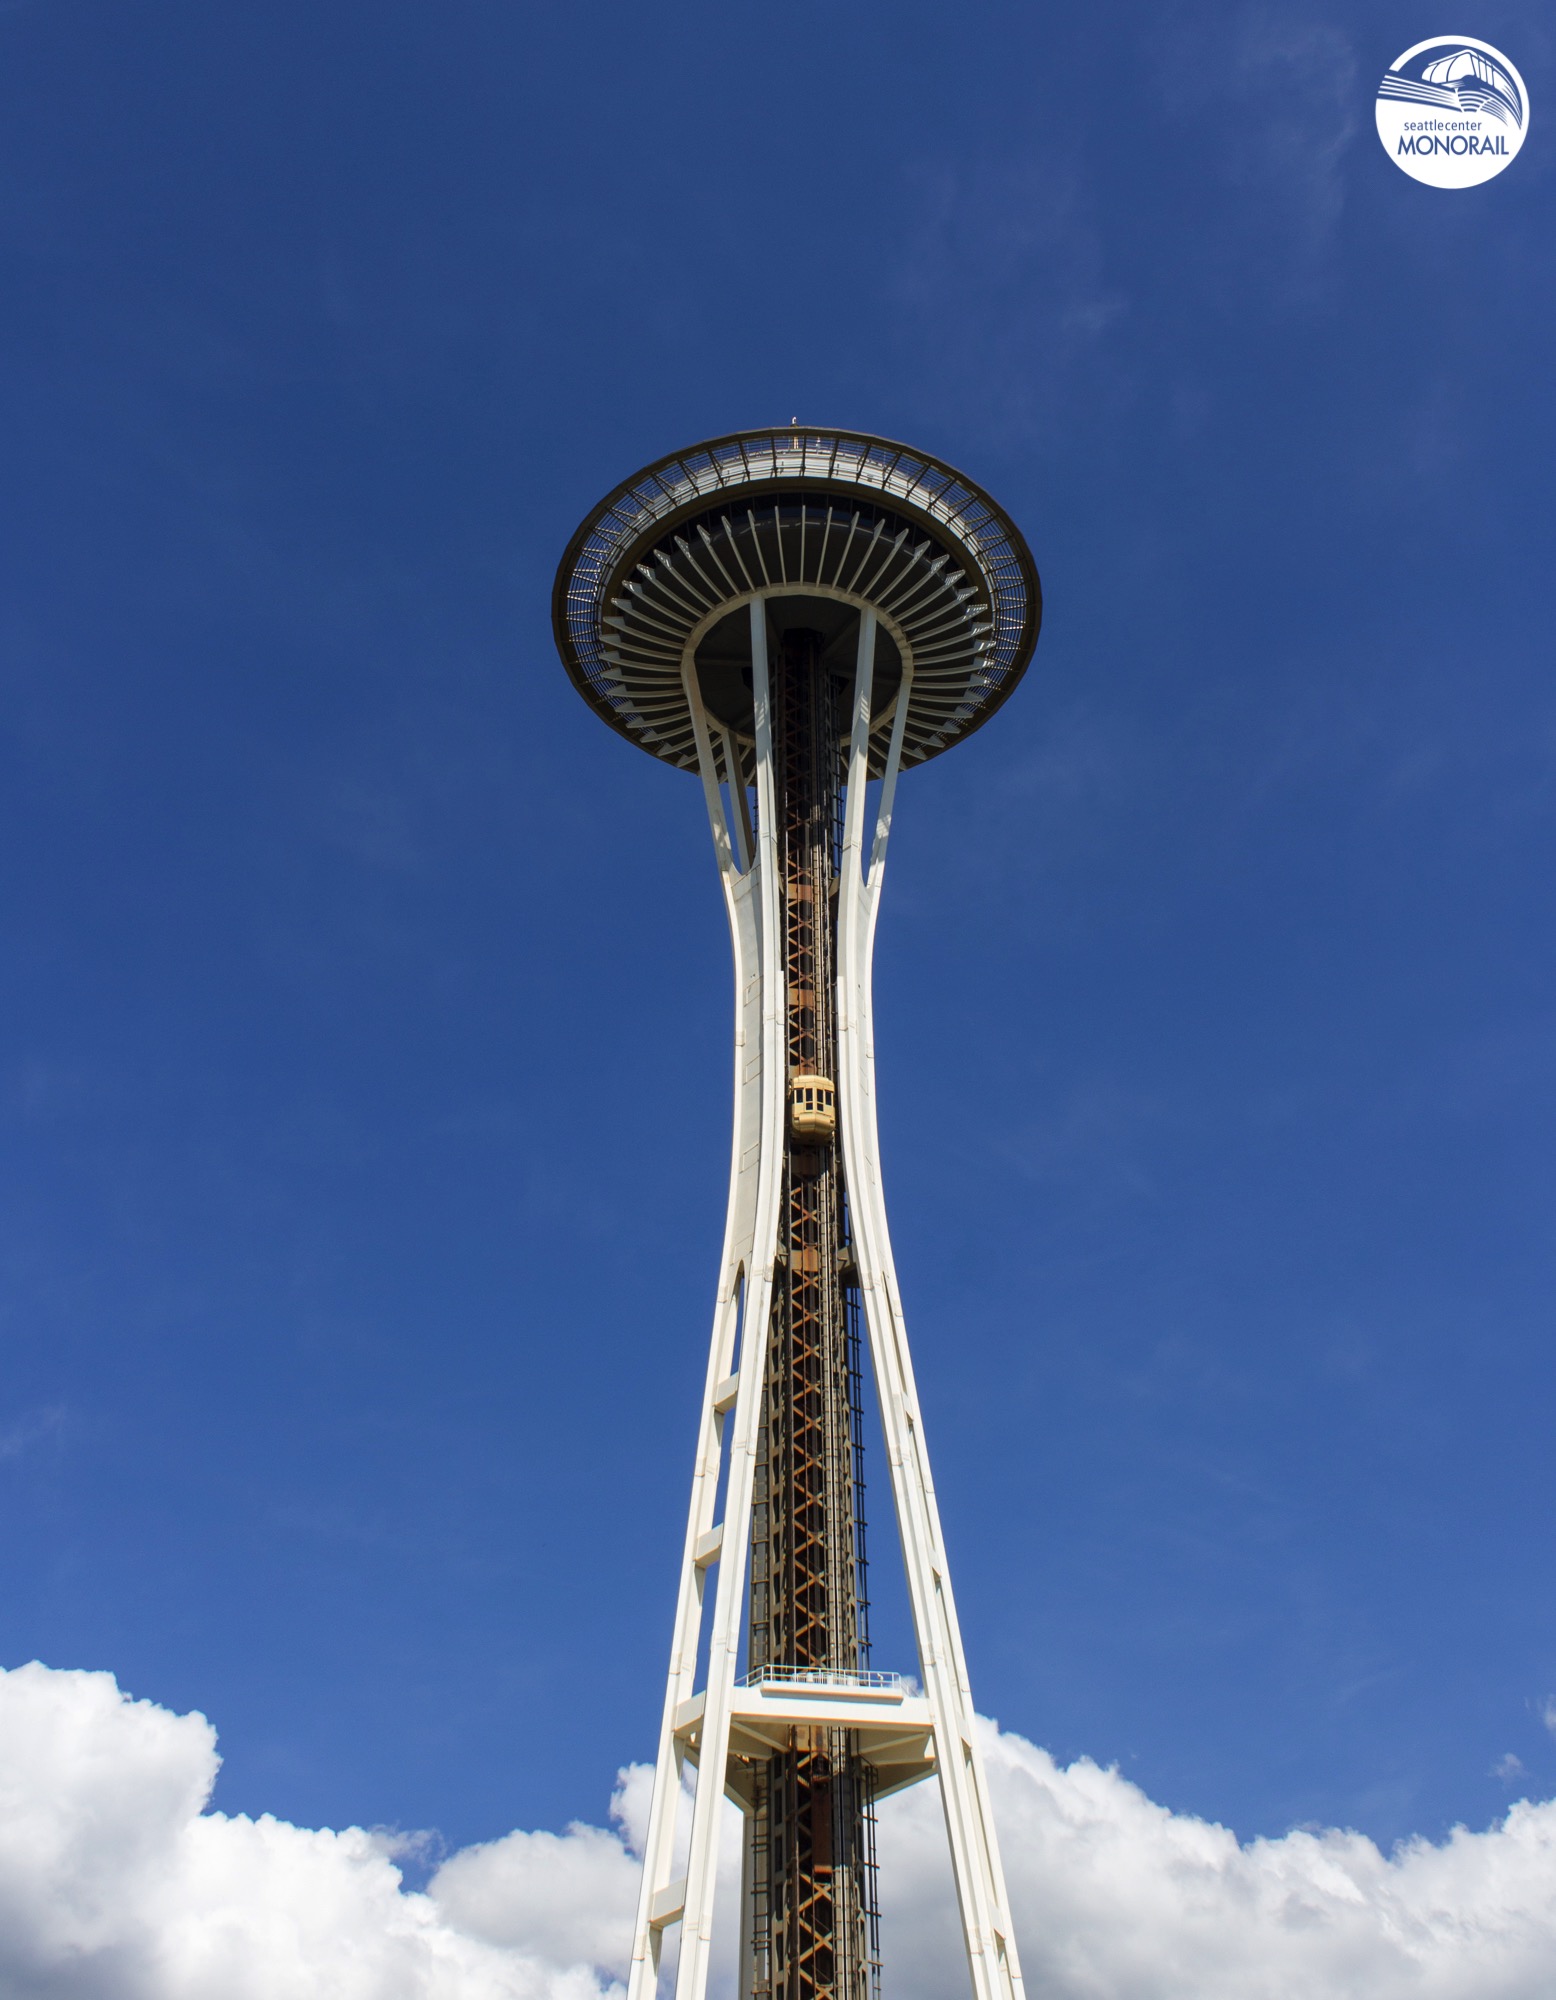 Sweeping city views from the Space Needle! | Seattle MonorailSeattle ...